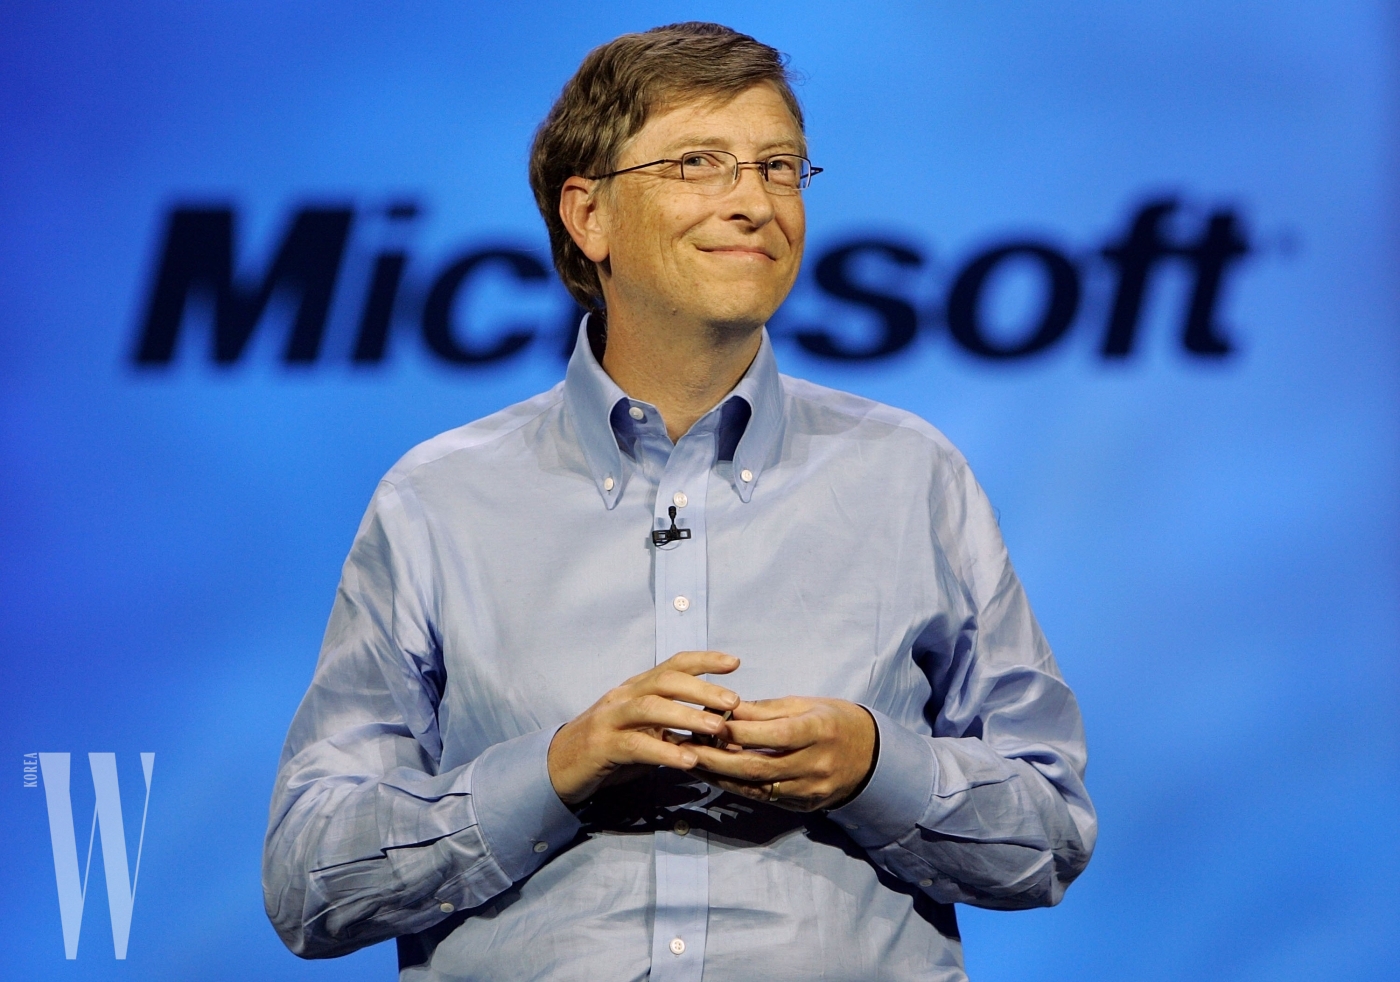 Bill Gates Attends 2007 Consumer Electronics Show